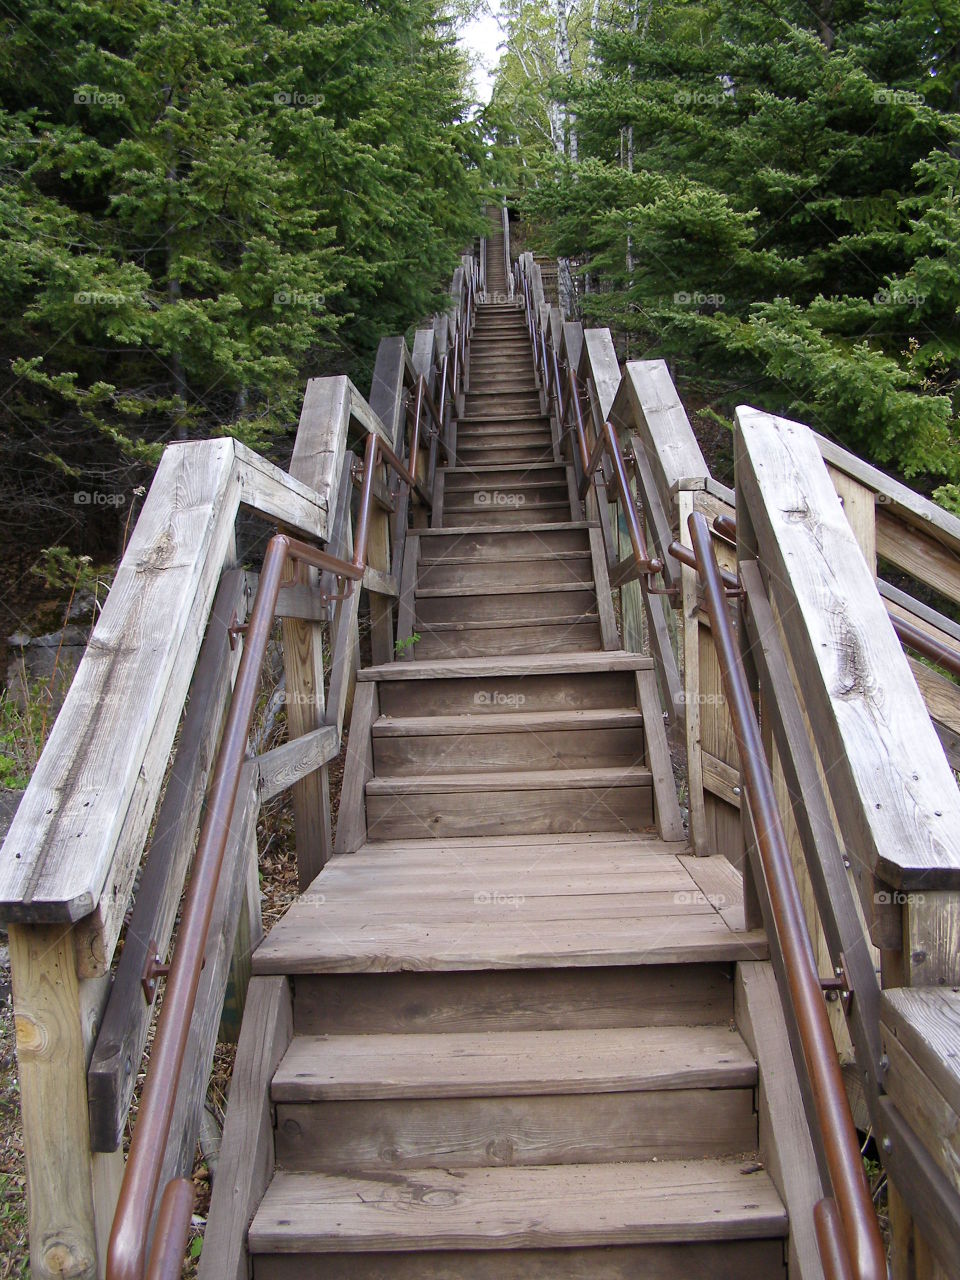 Stairs to the shore (Split Rock Lighthouse) #3